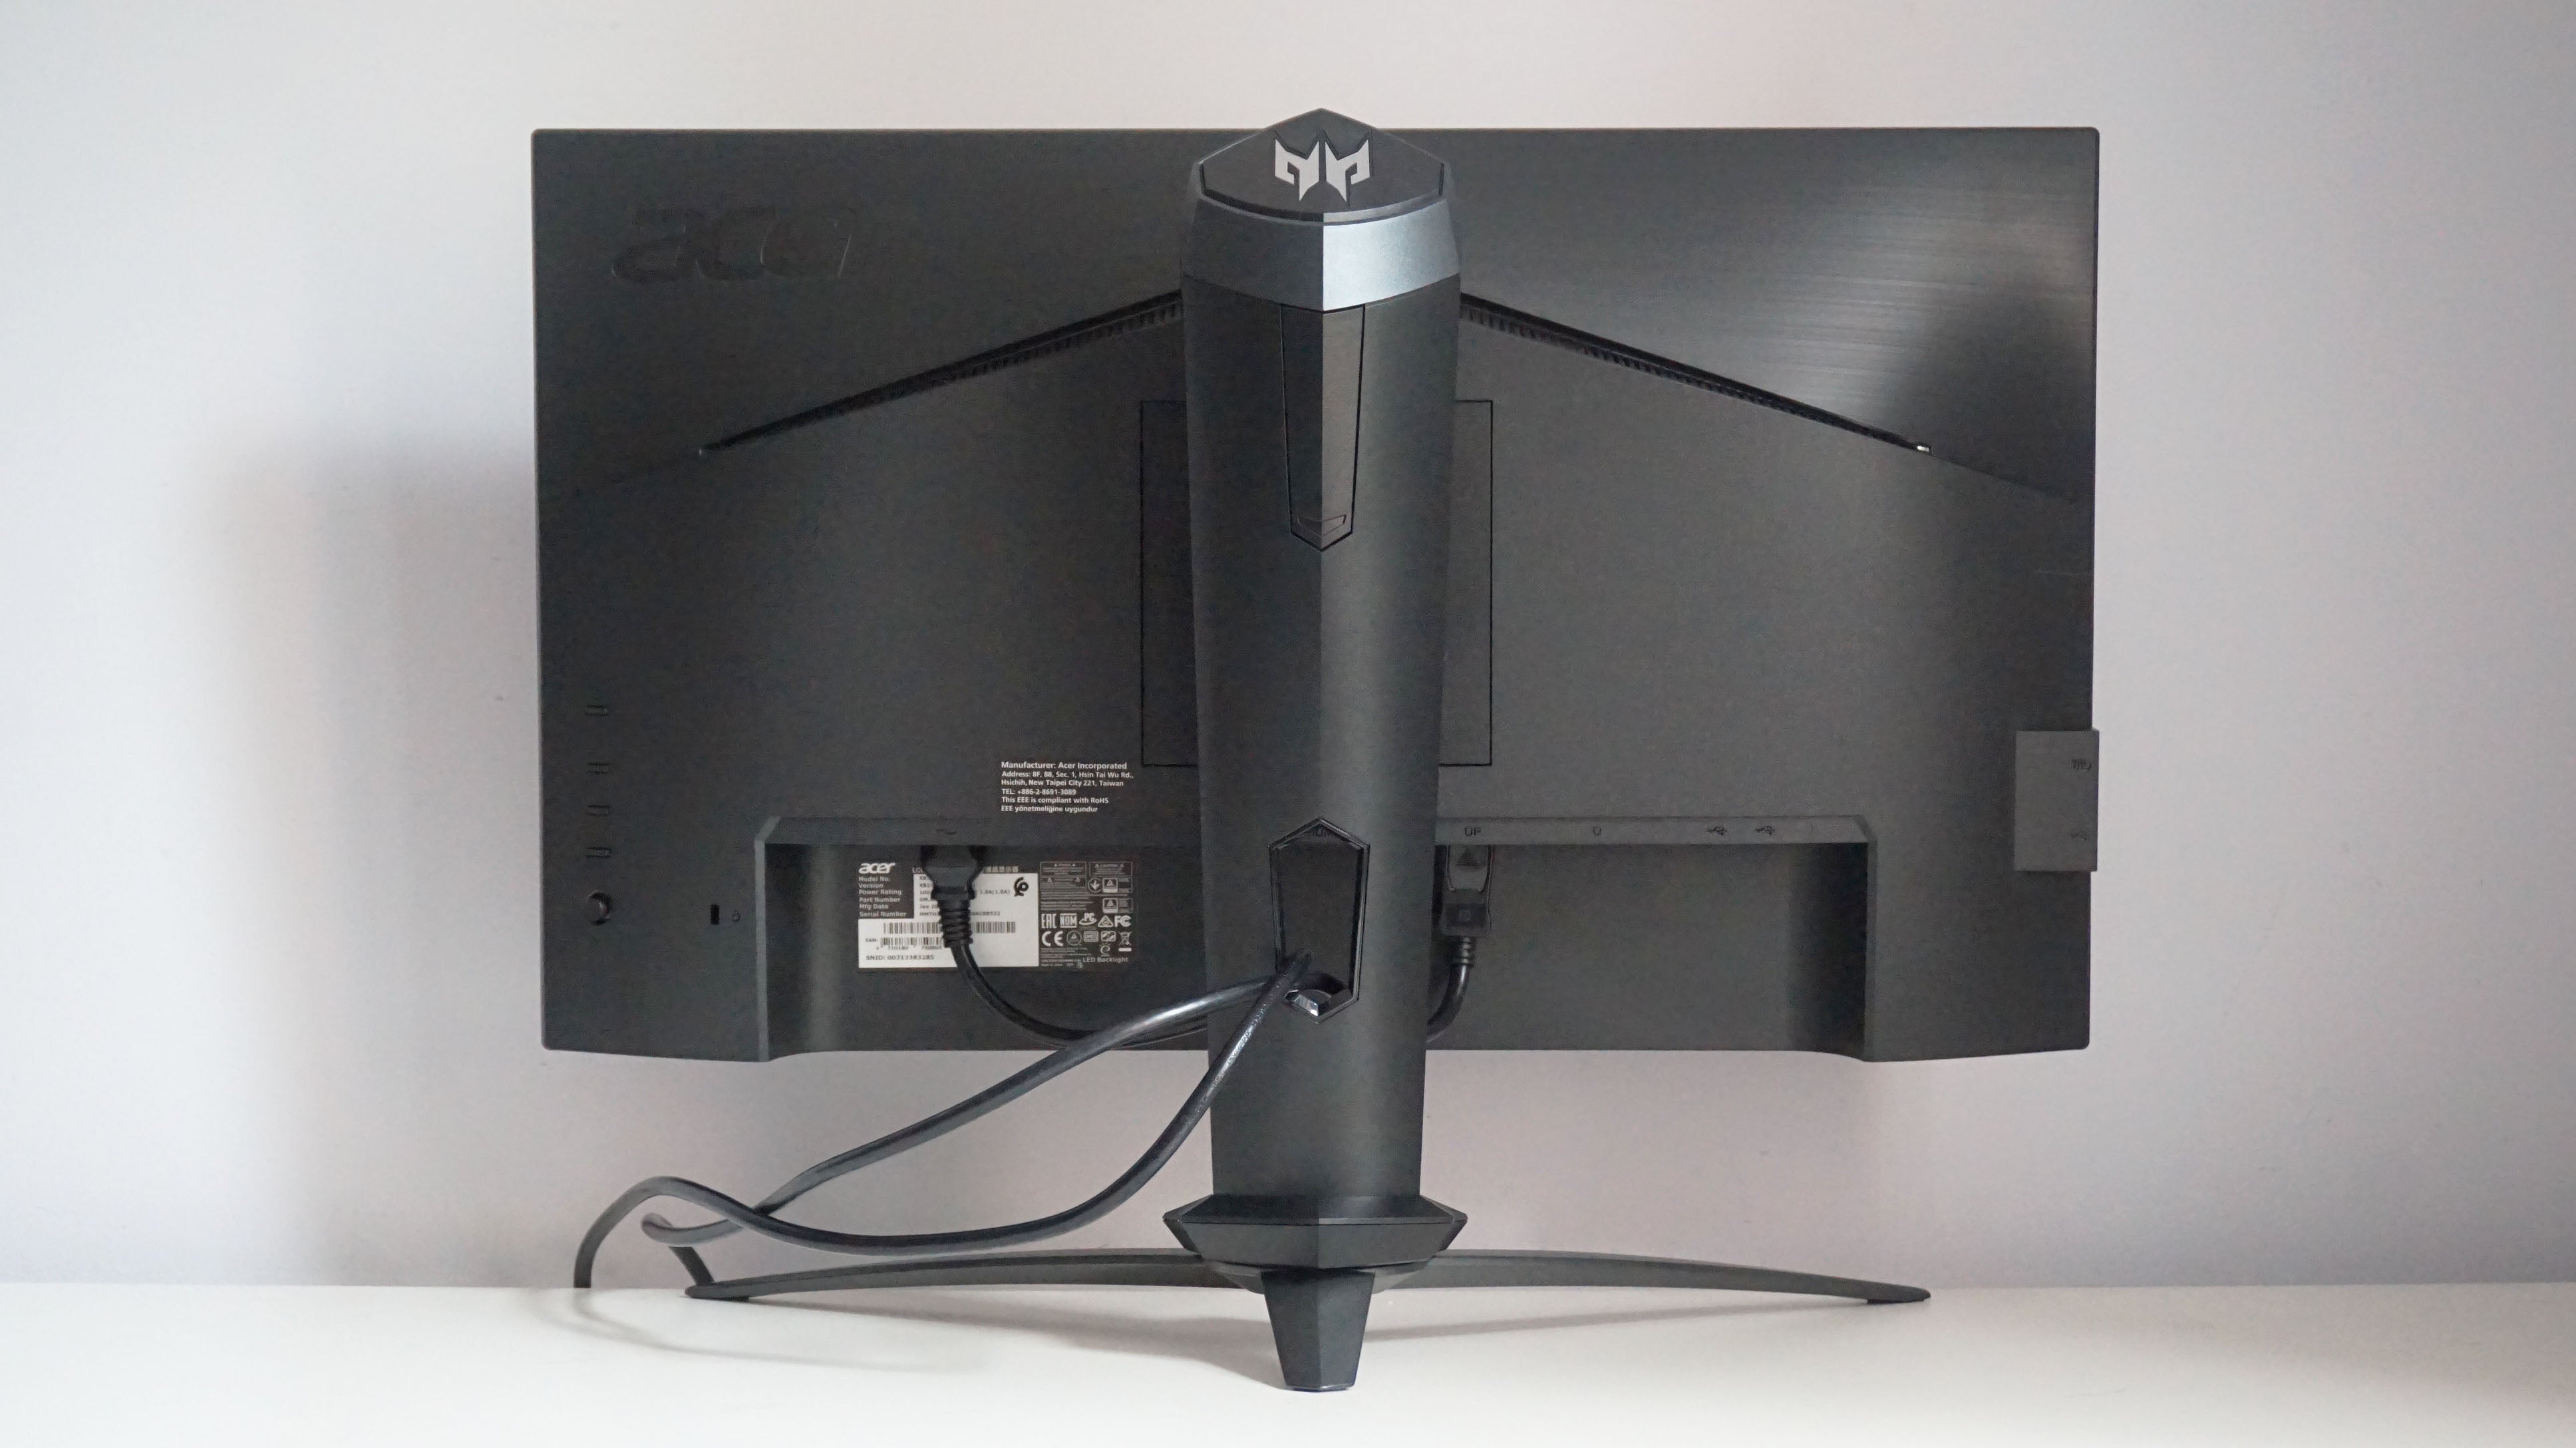 A photo of the Acer Predator XB253Q gaming monitor from the back